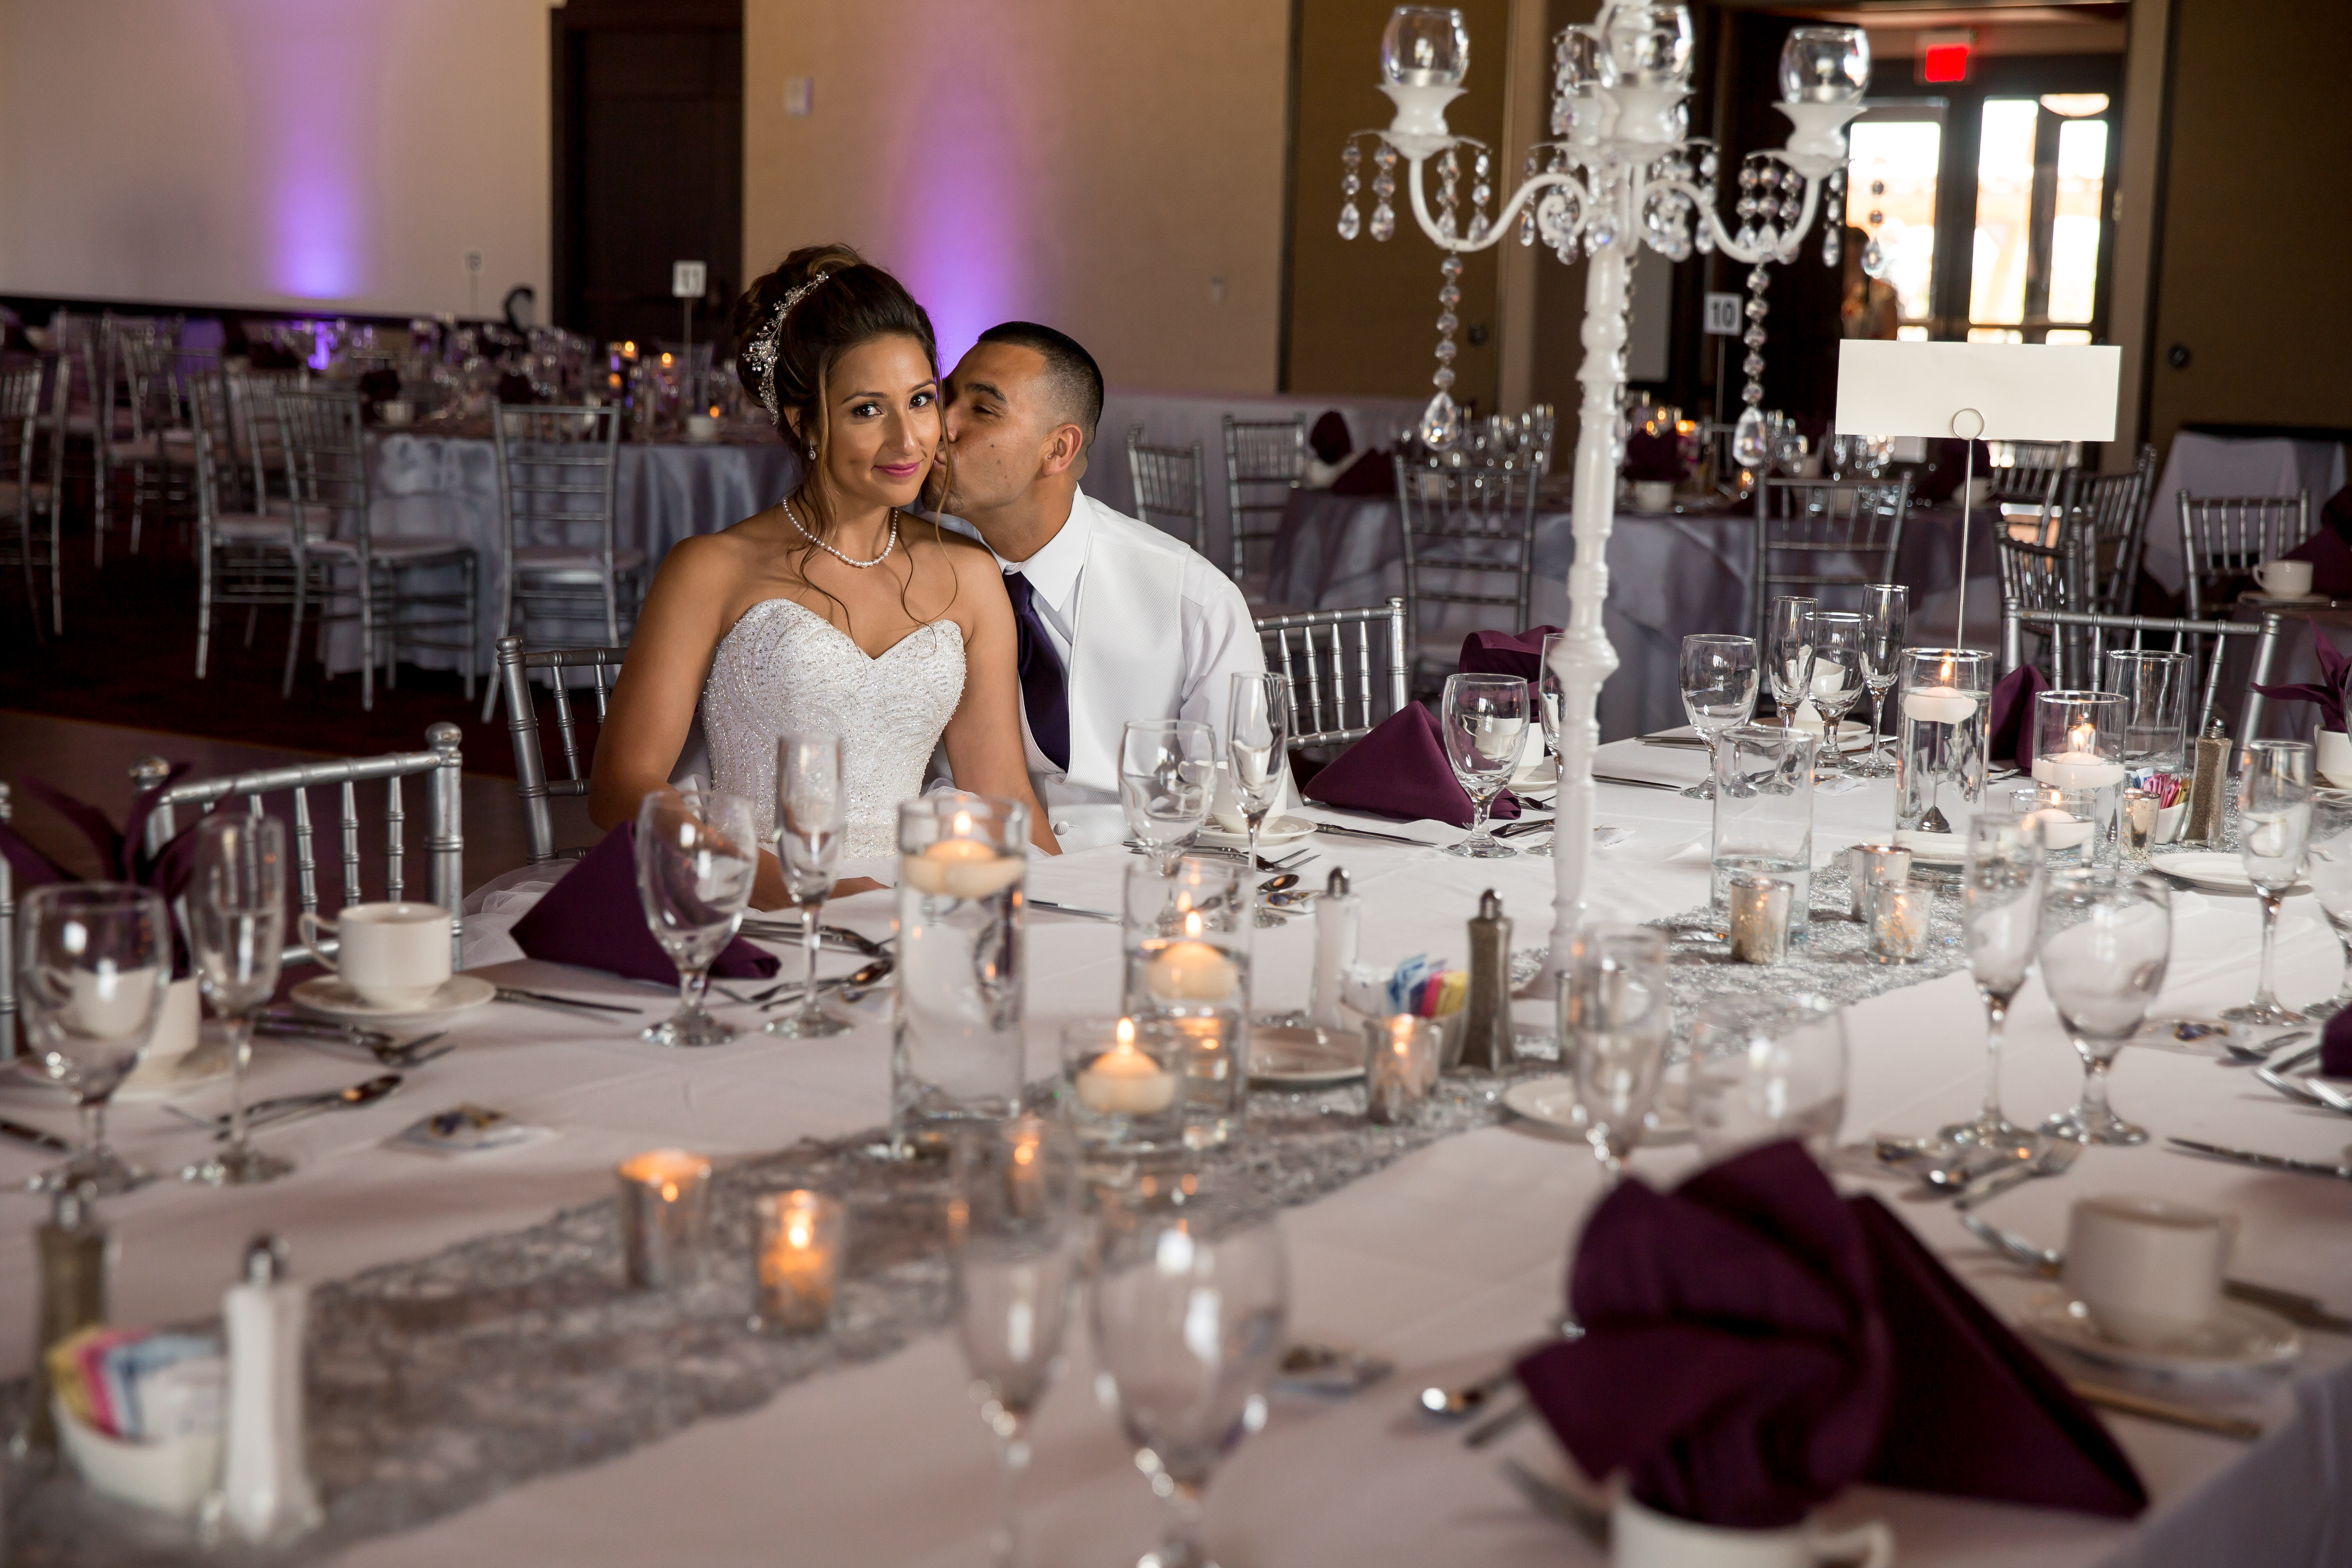 Perfect Wedding Guide planning design inspo ceremony inspiration marriage wedding vows celebration engaged planner tips tricks decor event New Mexico Albuquerque Santa Fe true love reception happily ever after white wedding silver details tablescape reception decor candles crystals